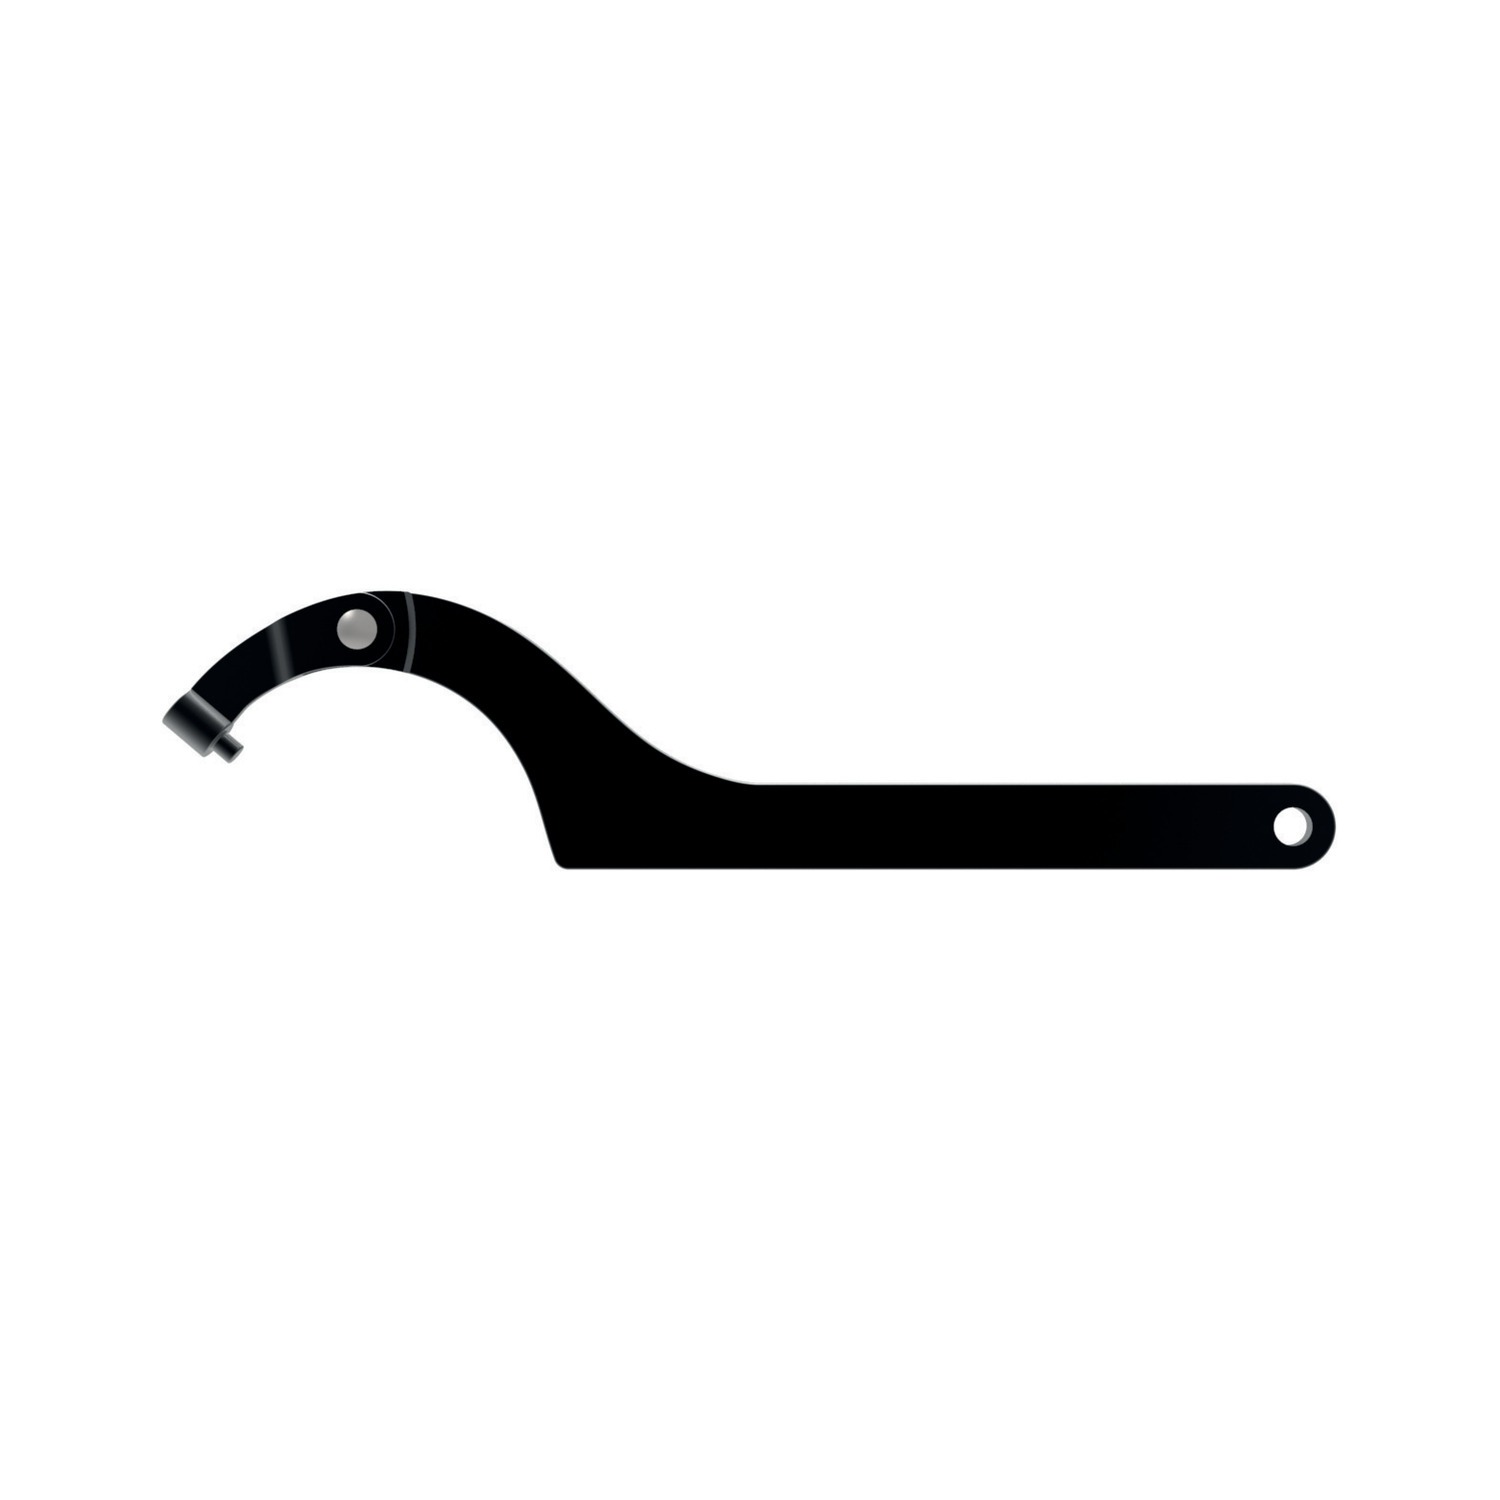 Hook Spanners - with Pin Nose Long version hook spanner with pin nose available in various sizes, blackened or nickled plated.